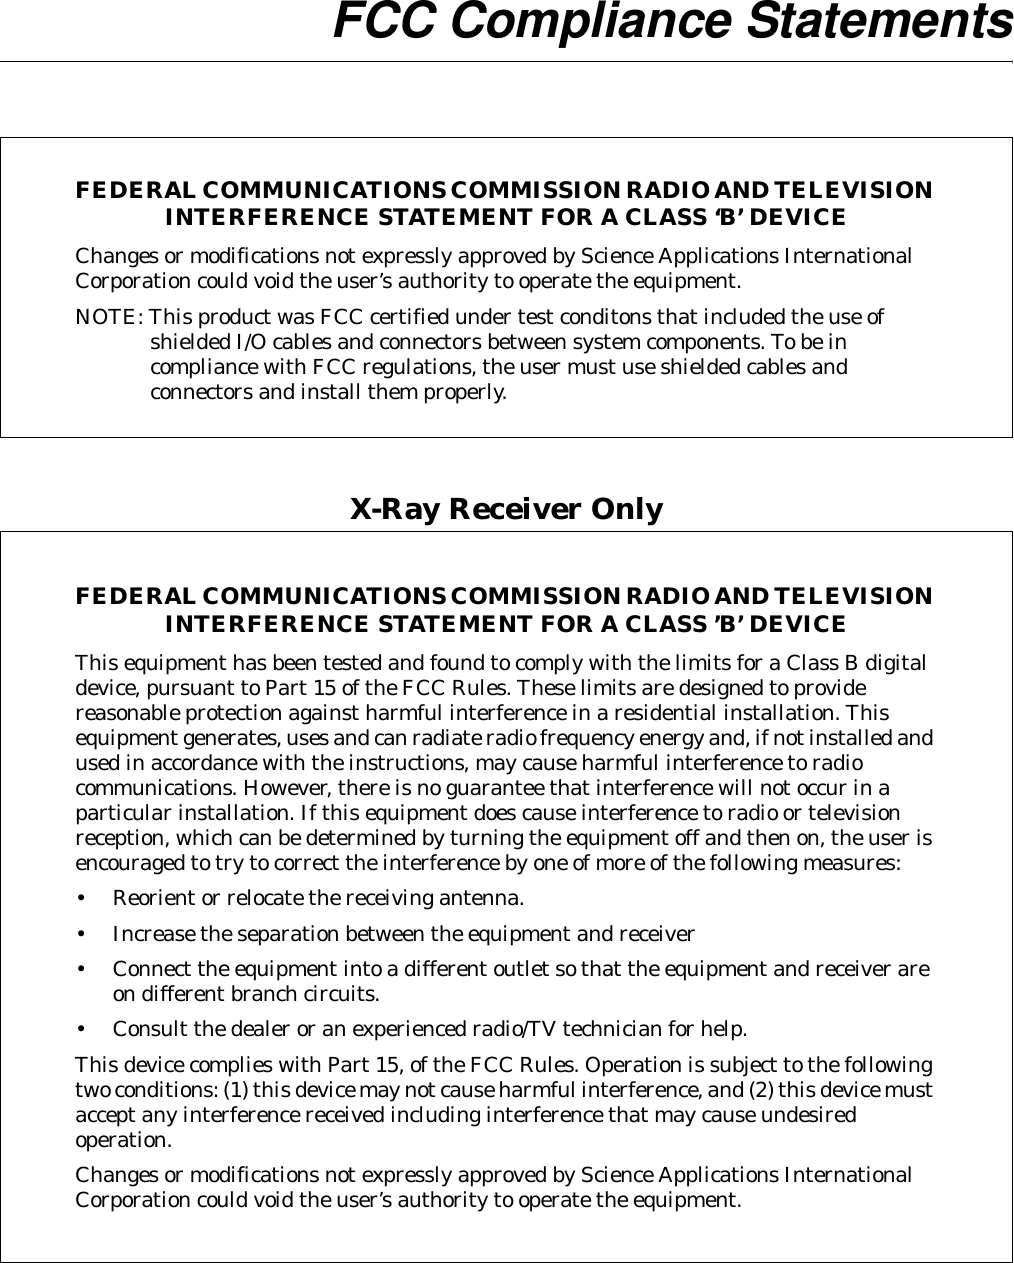  FCC Compliance StatementsFEDERAL COMMUNICATIONS COMMISSION RADIO AND TELEVISION INTERFERENCE STATEMENT FOR A CLASS ‘B’ DEVICEChanges or modifications not expressly approved by Science Applications International Corporation could void the user’s authority to operate the equipment.NOTE: This product was FCC certified under test conditons that included the use of shielded I/O cables and connectors between system components. To be in compliance with FCC regulations, the user must use shielded cables and connectors and install them properly.X-Ray Receiver OnlyFEDERAL COMMUNICATIONS COMMISSION RADIO AND TELEVISION INTERFERENCE STATEMENT FOR A CLASS ’B’ DEVICEThis equipment has been tested and found to comply with the limits for a Class B digital device, pursuant to Part 15 of the FCC Rules. These limits are designed to provide reasonable protection against harmful interference in a residential installation. This equipment generates, uses and can radiate radio frequency energy and, if not installed and used in accordance with the instructions, may cause harmful interference to radio communications. However, there is no guarantee that interference will not occur in a particular installation. If this equipment does cause interference to radio or television reception, which can be determined by turning the equipment off and then on, the user is encouraged to try to correct the interference by one of more of the following measures:•Reorient or relocate the receiving antenna.•Increase the separation between the equipment and receiver•Connect the equipment into a different outlet so that the equipment and receiver areon different branch circuits.•Consult the dealer or an experienced radio/TV technician for help.This device complies with Part 15, of the FCC Rules. Operation is subject to the following two conditions: (1) this device may not cause harmful interference, and (2) this device must accept any interference received including interference that may cause undesired operation.Changes or modifications not expressly approved by Science Applications International Corporation could void the user’s authority to operate the equipment.